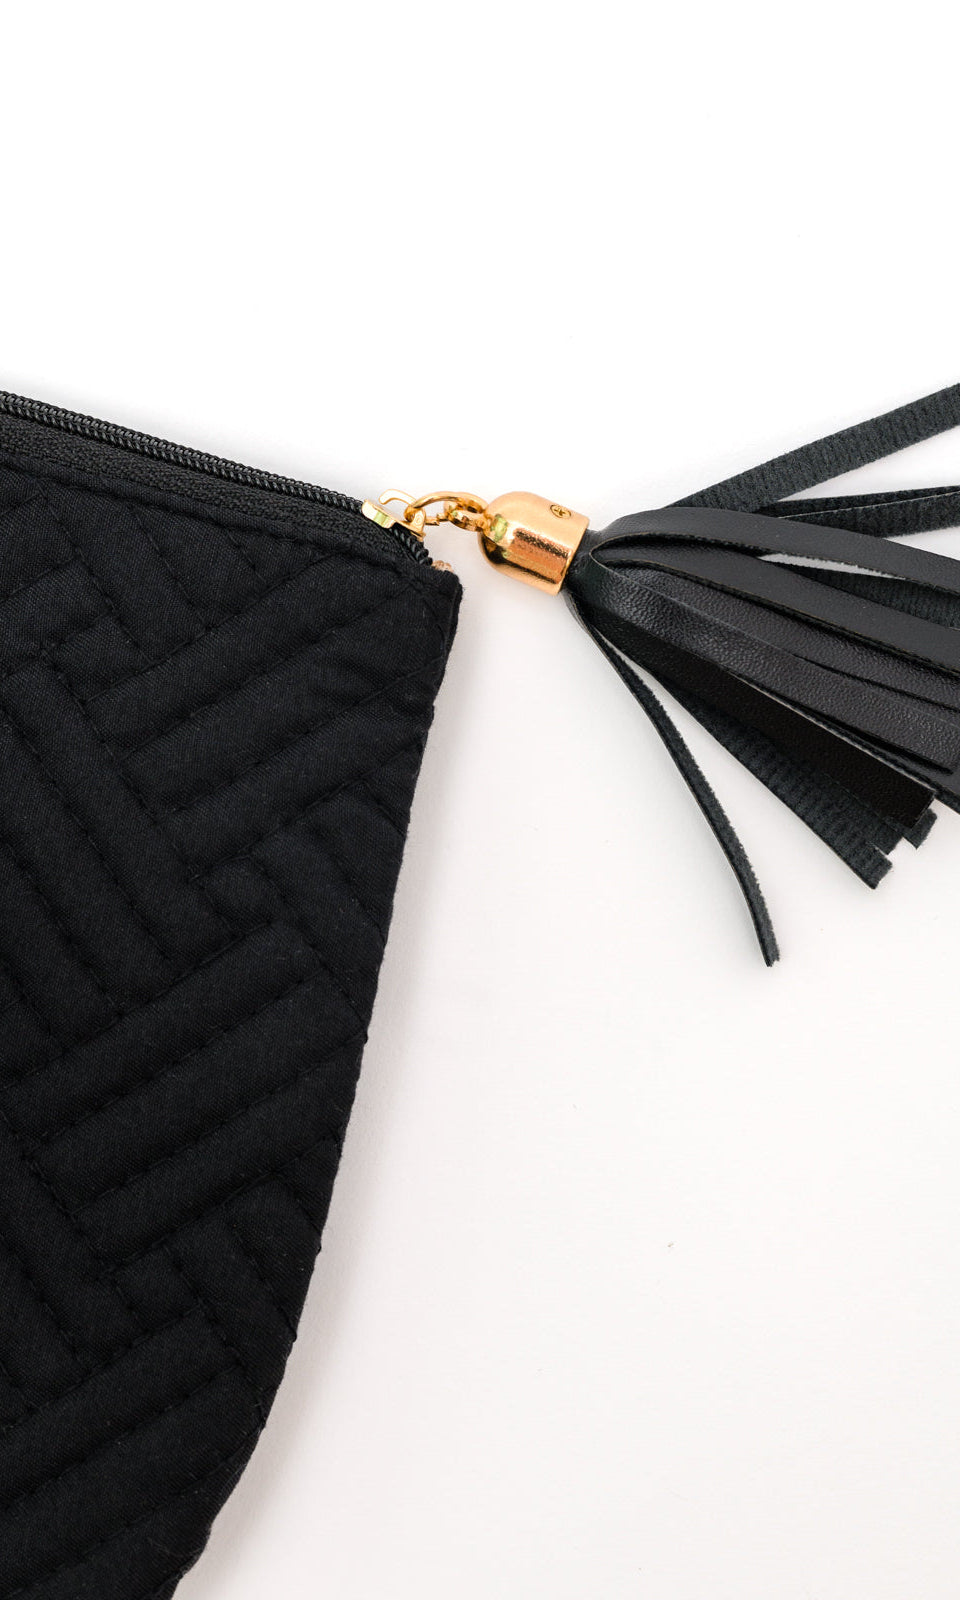 Quilted Travel Zip Pouch in Black Ave Shops